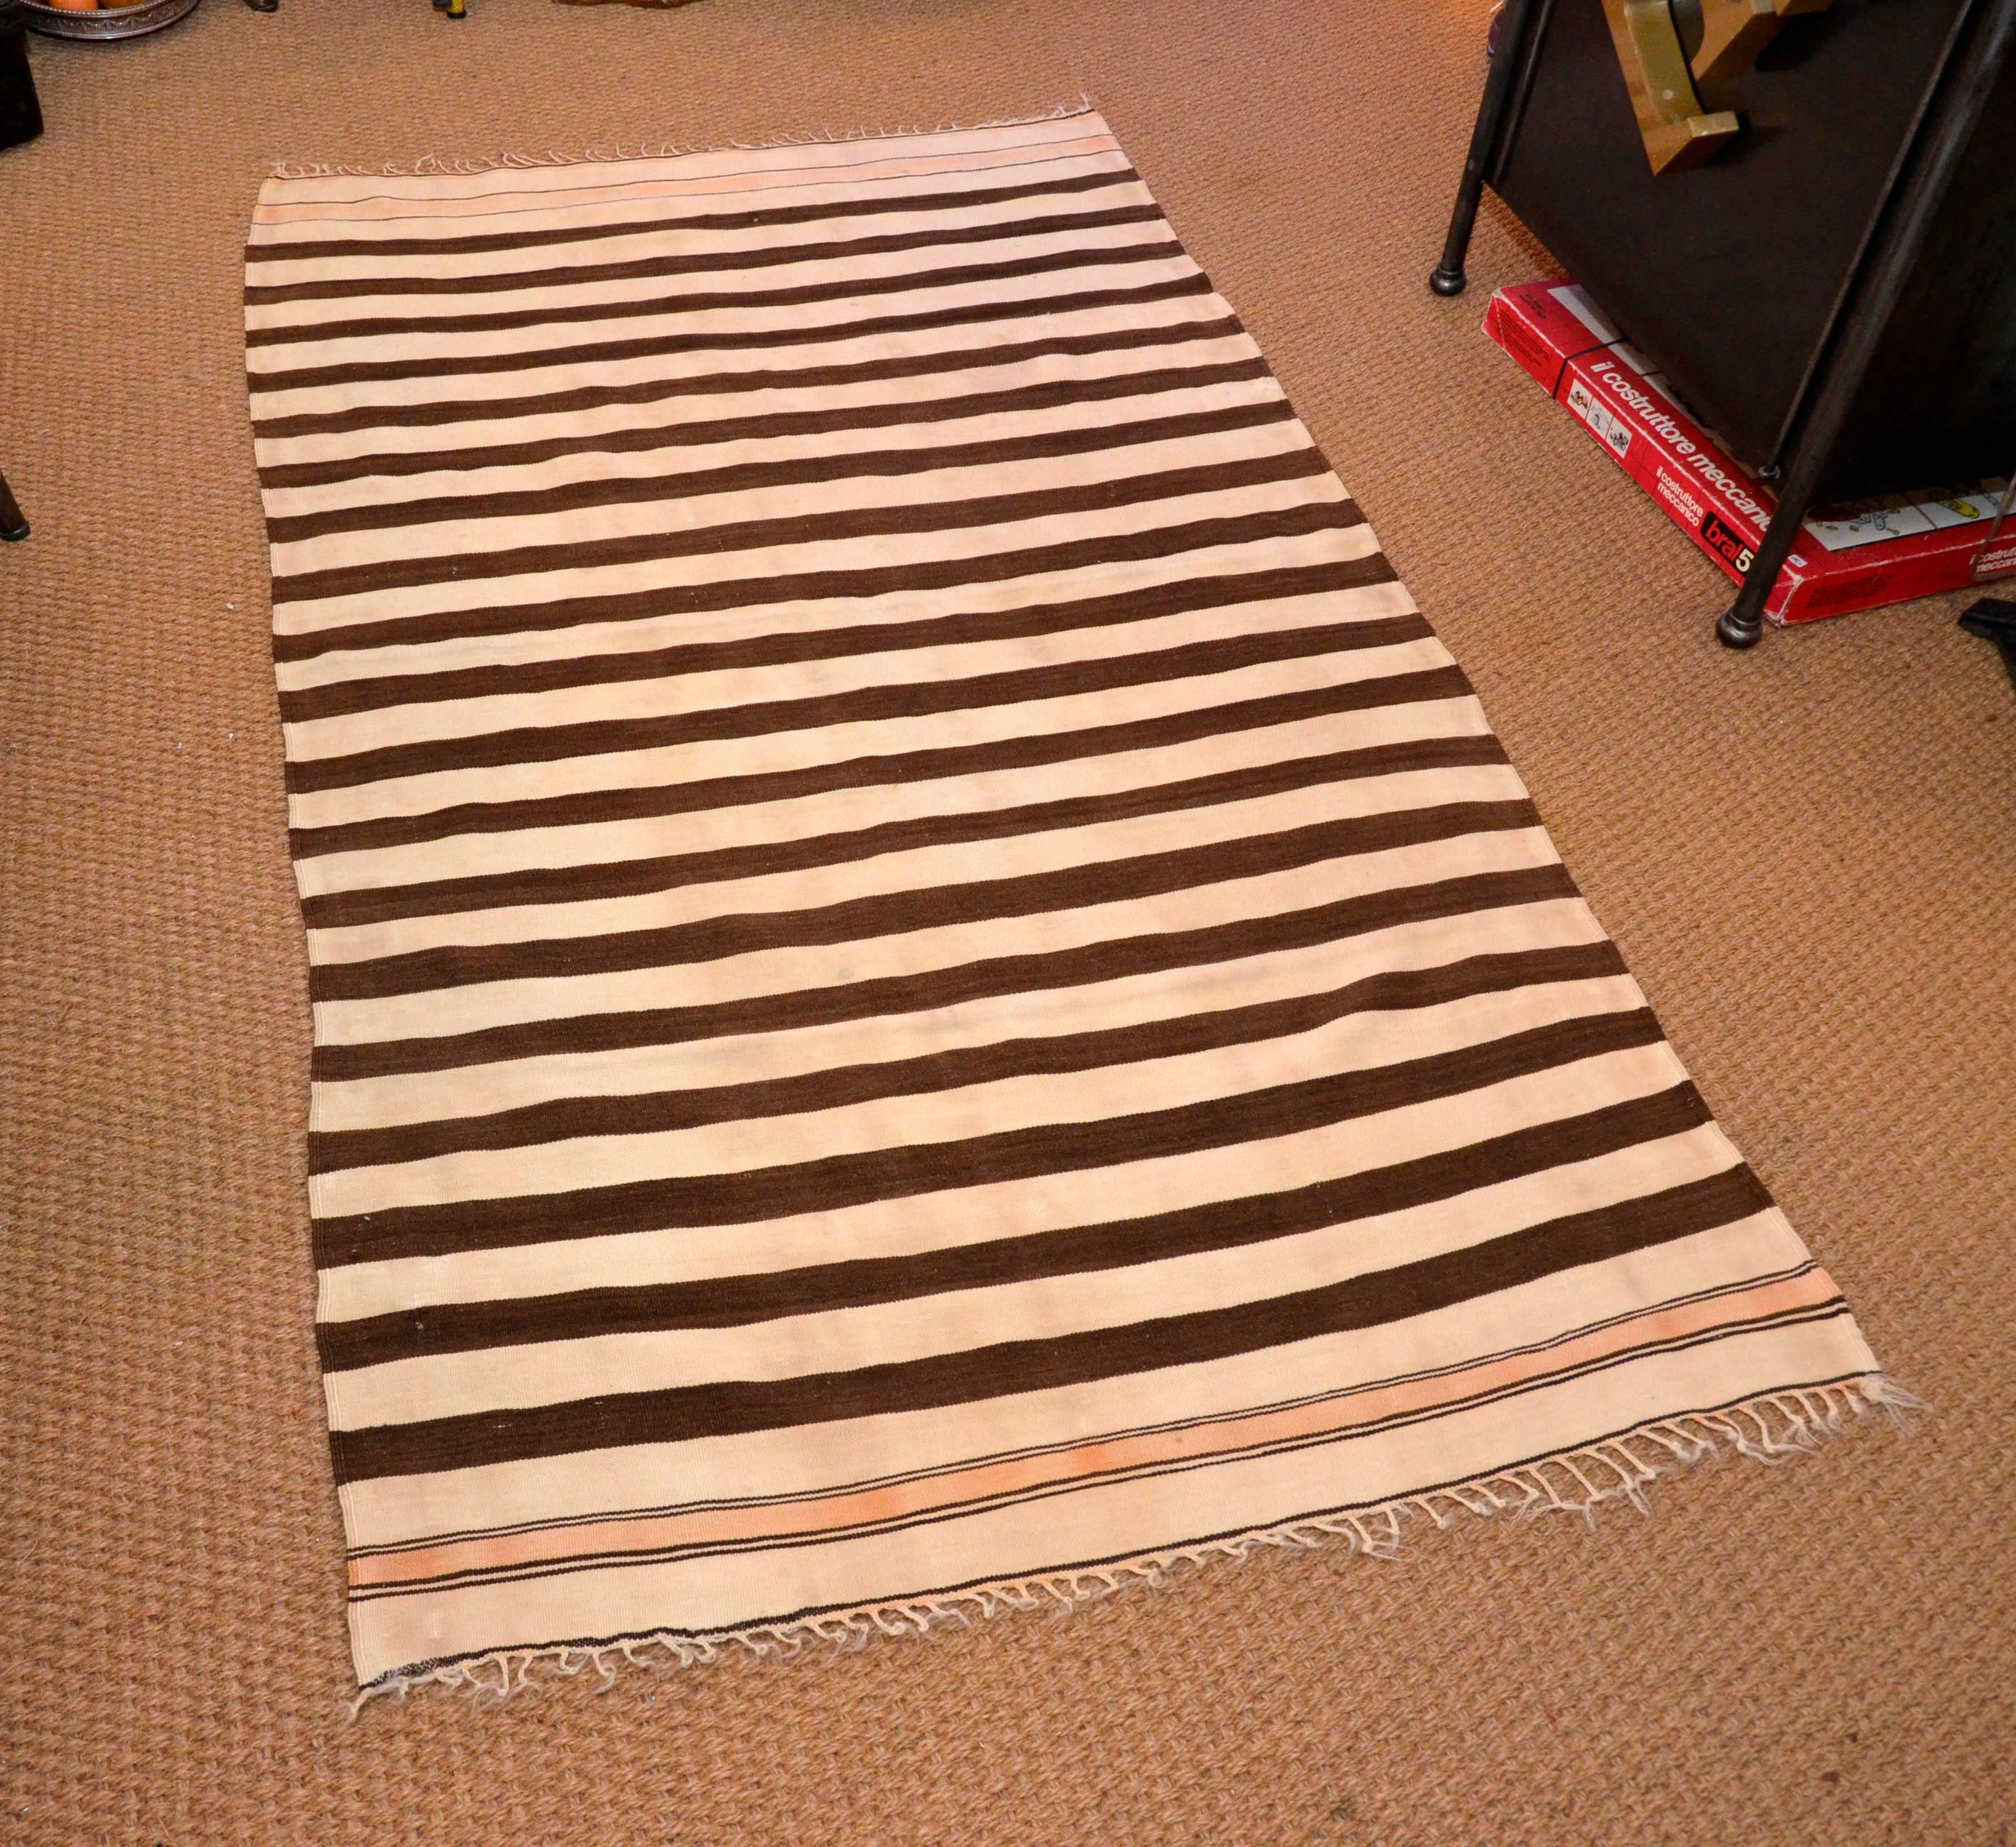 Mid-20th century handwoven natural wool stripes kilim from Morocco, North Africa, circa 1950s. Brown and cream not dyed color from sheep wool yarn.
Size: cm 186 x 110.
 